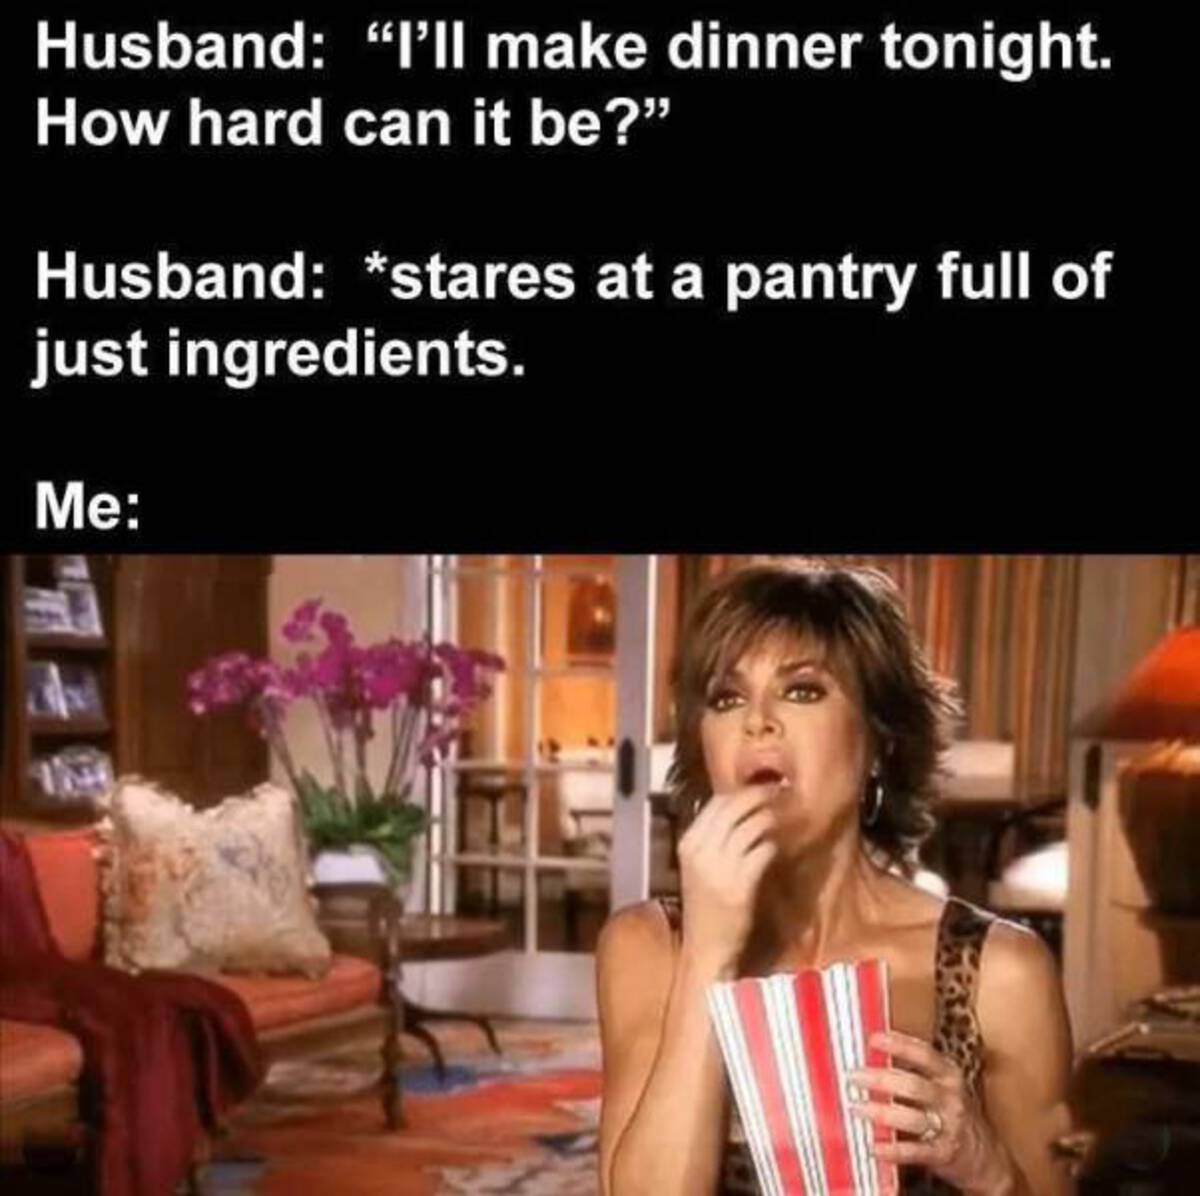 popcorn gif rinna - Husband "I'll make dinner tonight. How hard can it be?" Husband stares at a pantry full of just ingredients. Me